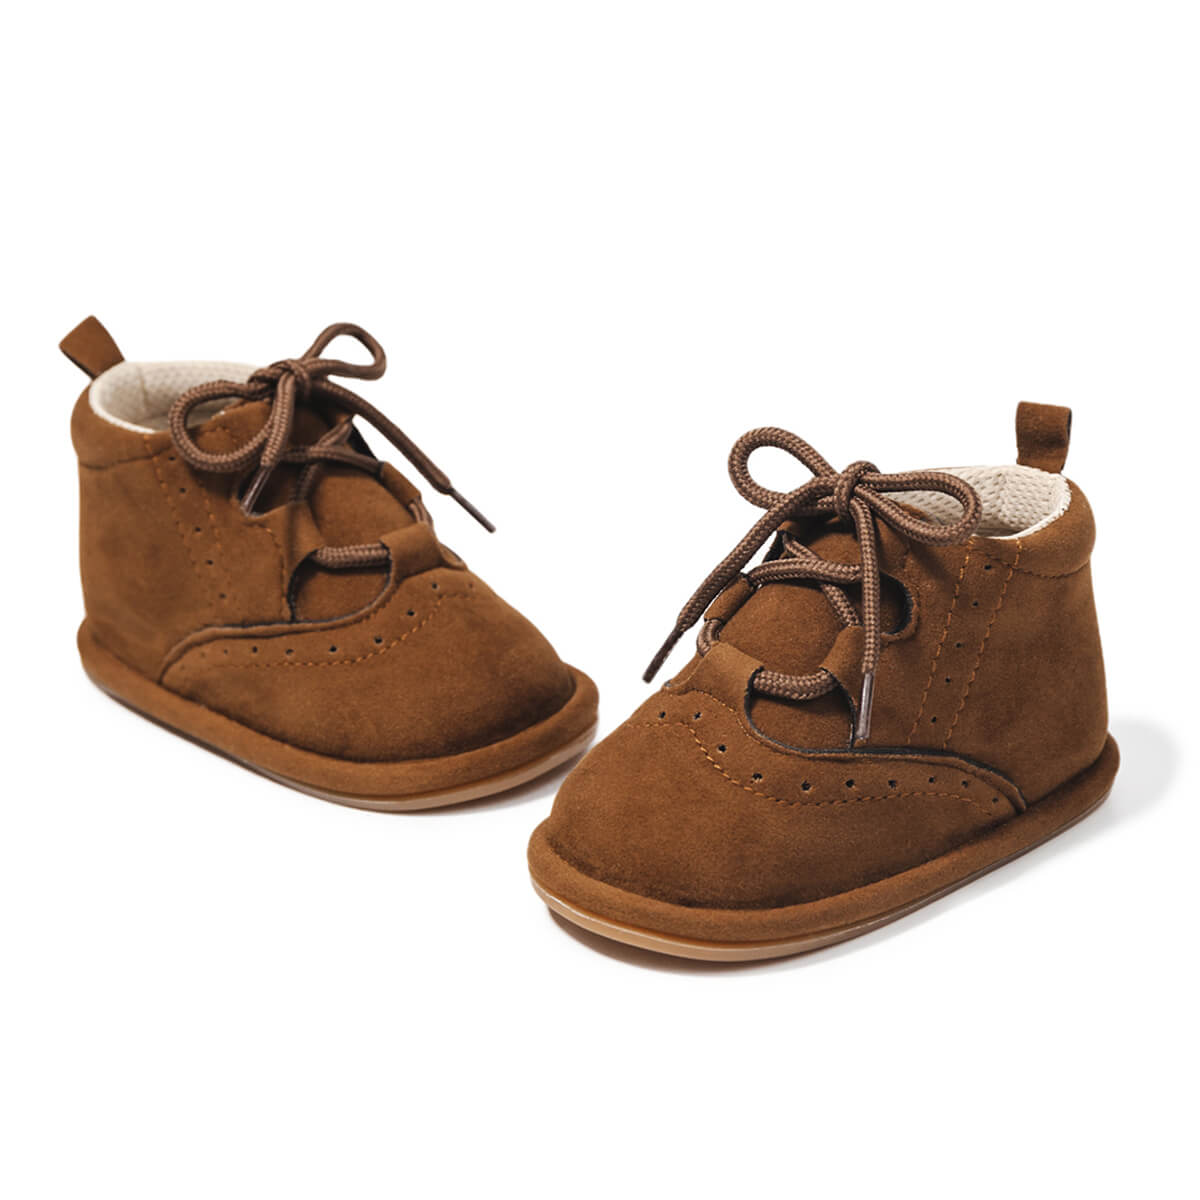 Hunter Soft Sole Shoes - Brown